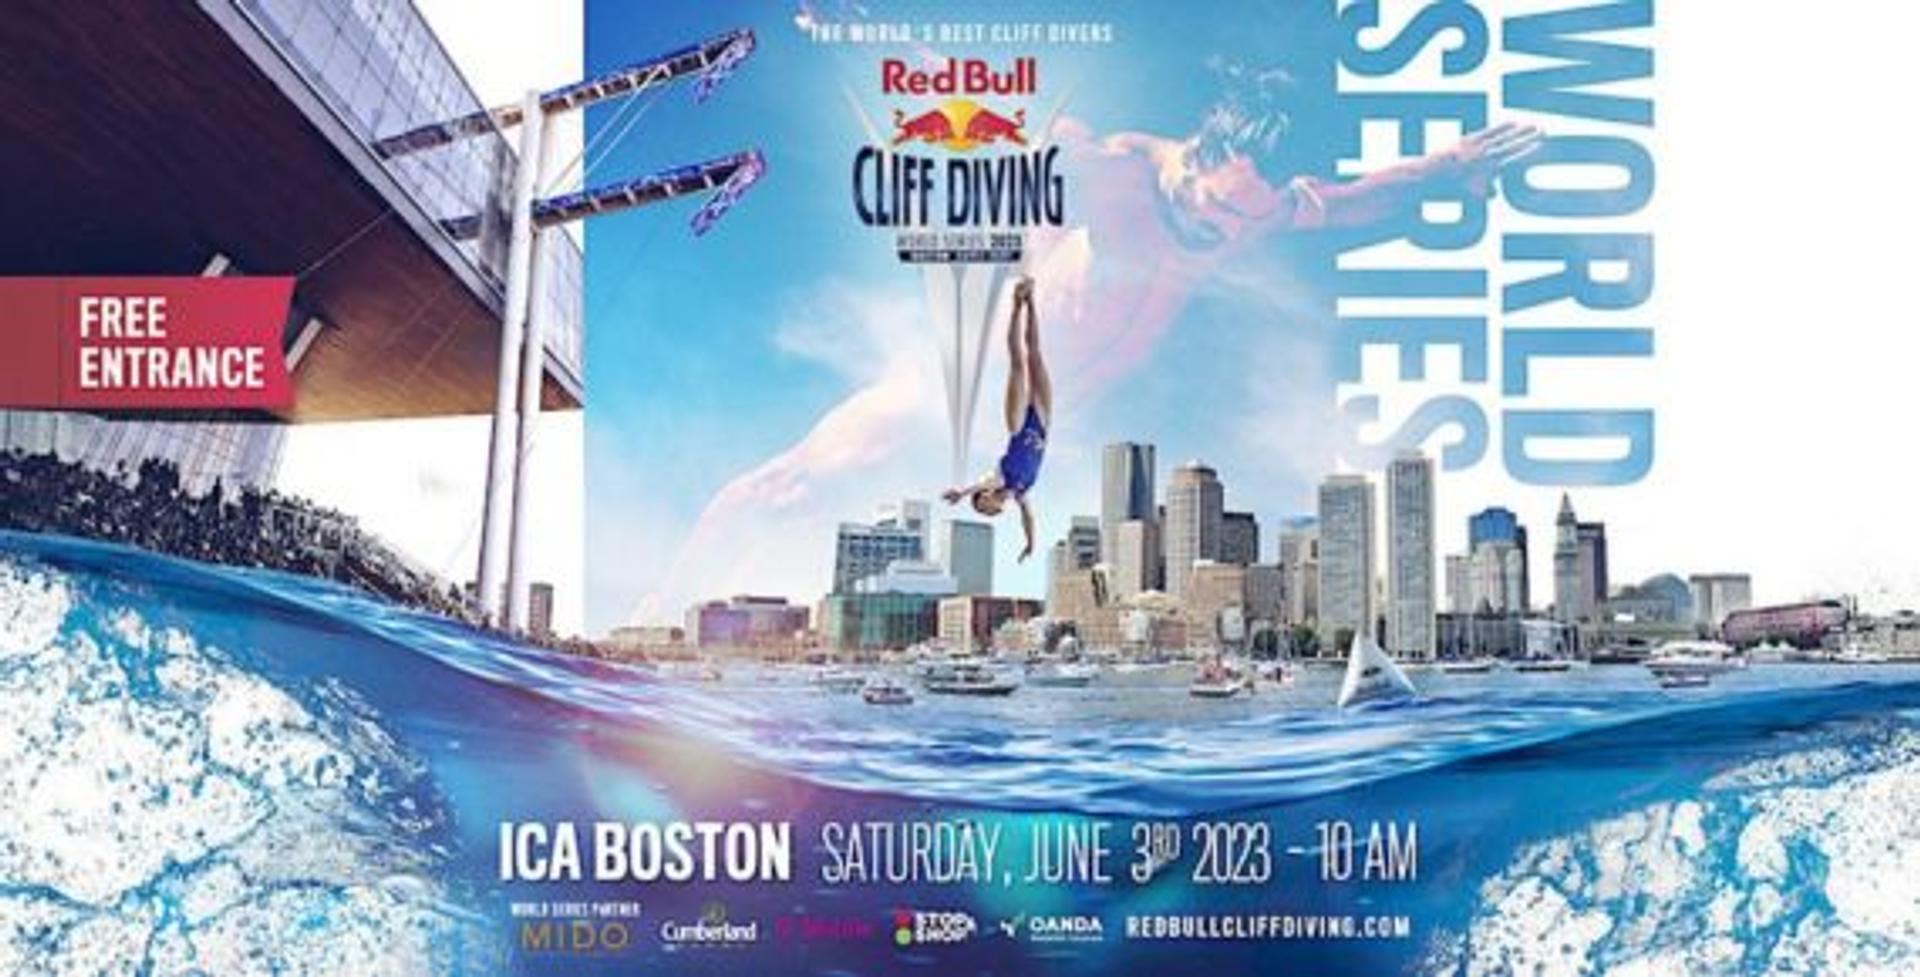 Red Bull: Cliff Diving